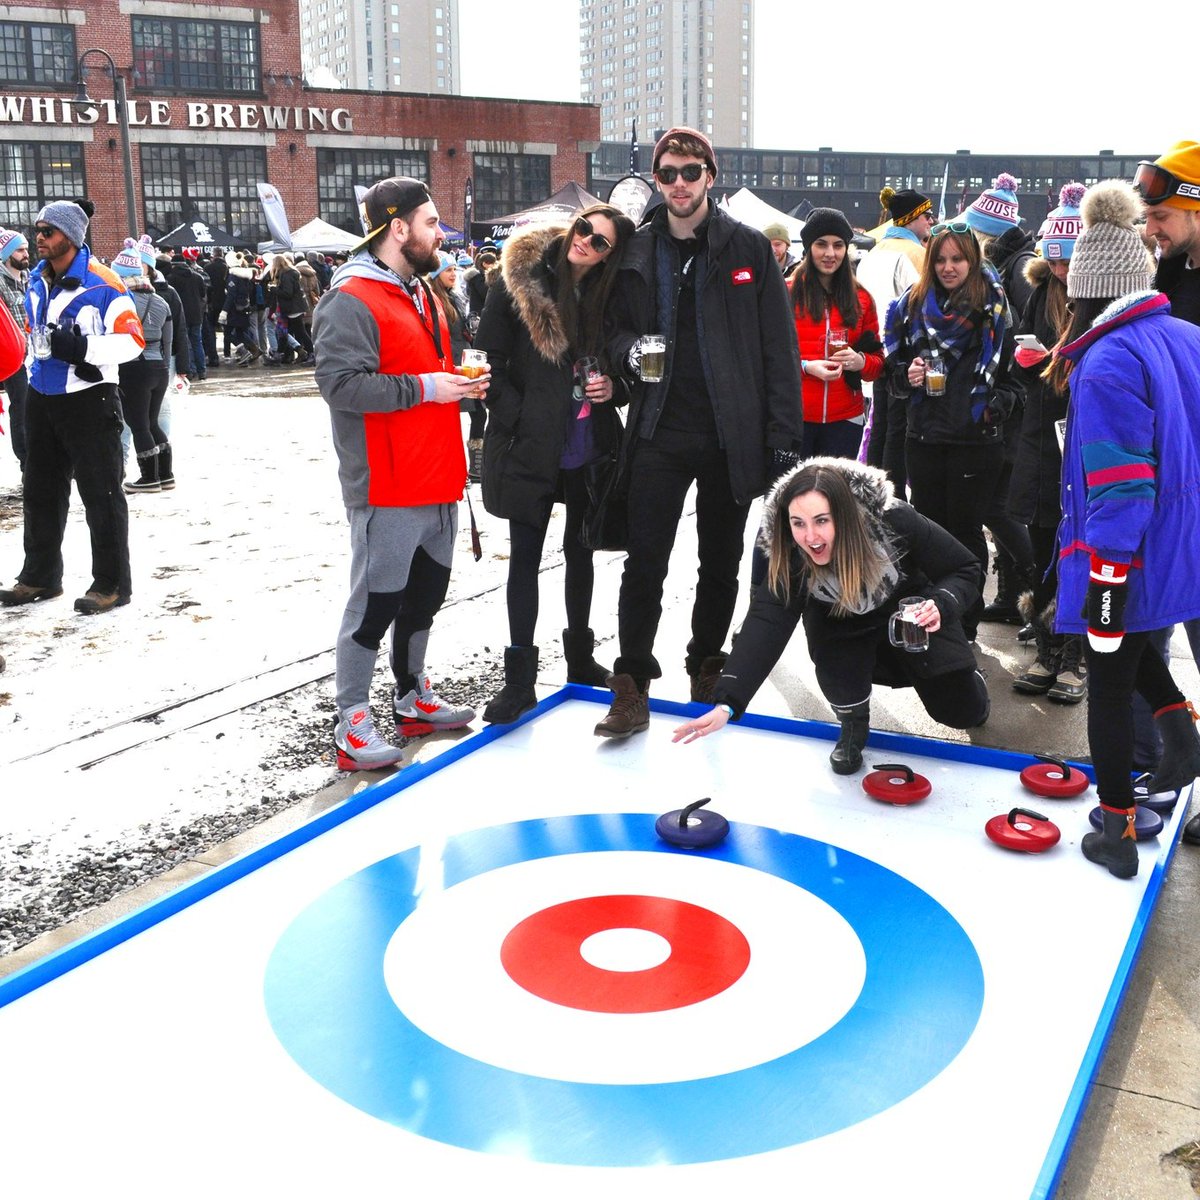 Planning a winter corporate event? Whether you want an indoor or outdoor event, spice it up by bringing Street Curling as a new and exciting activity that everyone will love! streetcurling.com/iceless-curlin…

#EventRentals #IcelessCurling #CurlAnywhere #CorporateEvent #WinterEvent